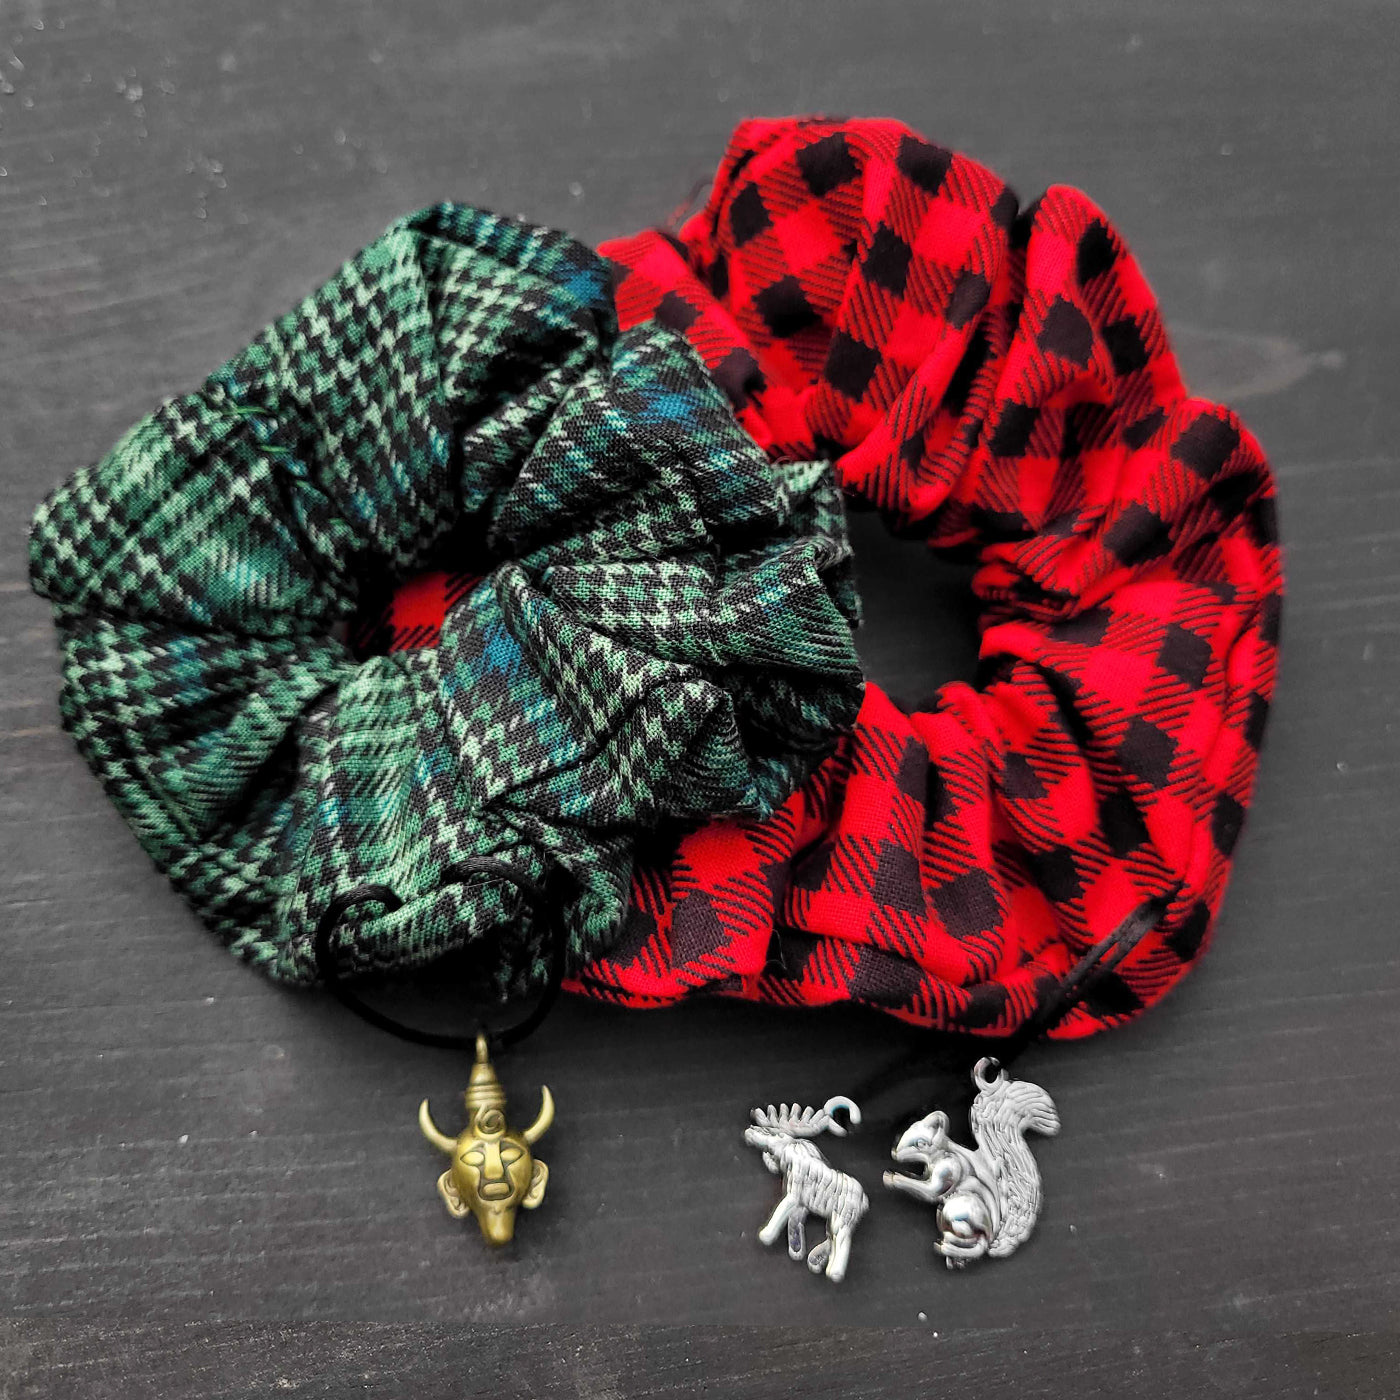 Close up view of two scrunchies against a black table top. One scrunchie has a green plaid pattern, with a brass Samulet charm at the bottom. The other scrunchie has a black and red plaid pattern, with moose and squirrel charms at the bottom.